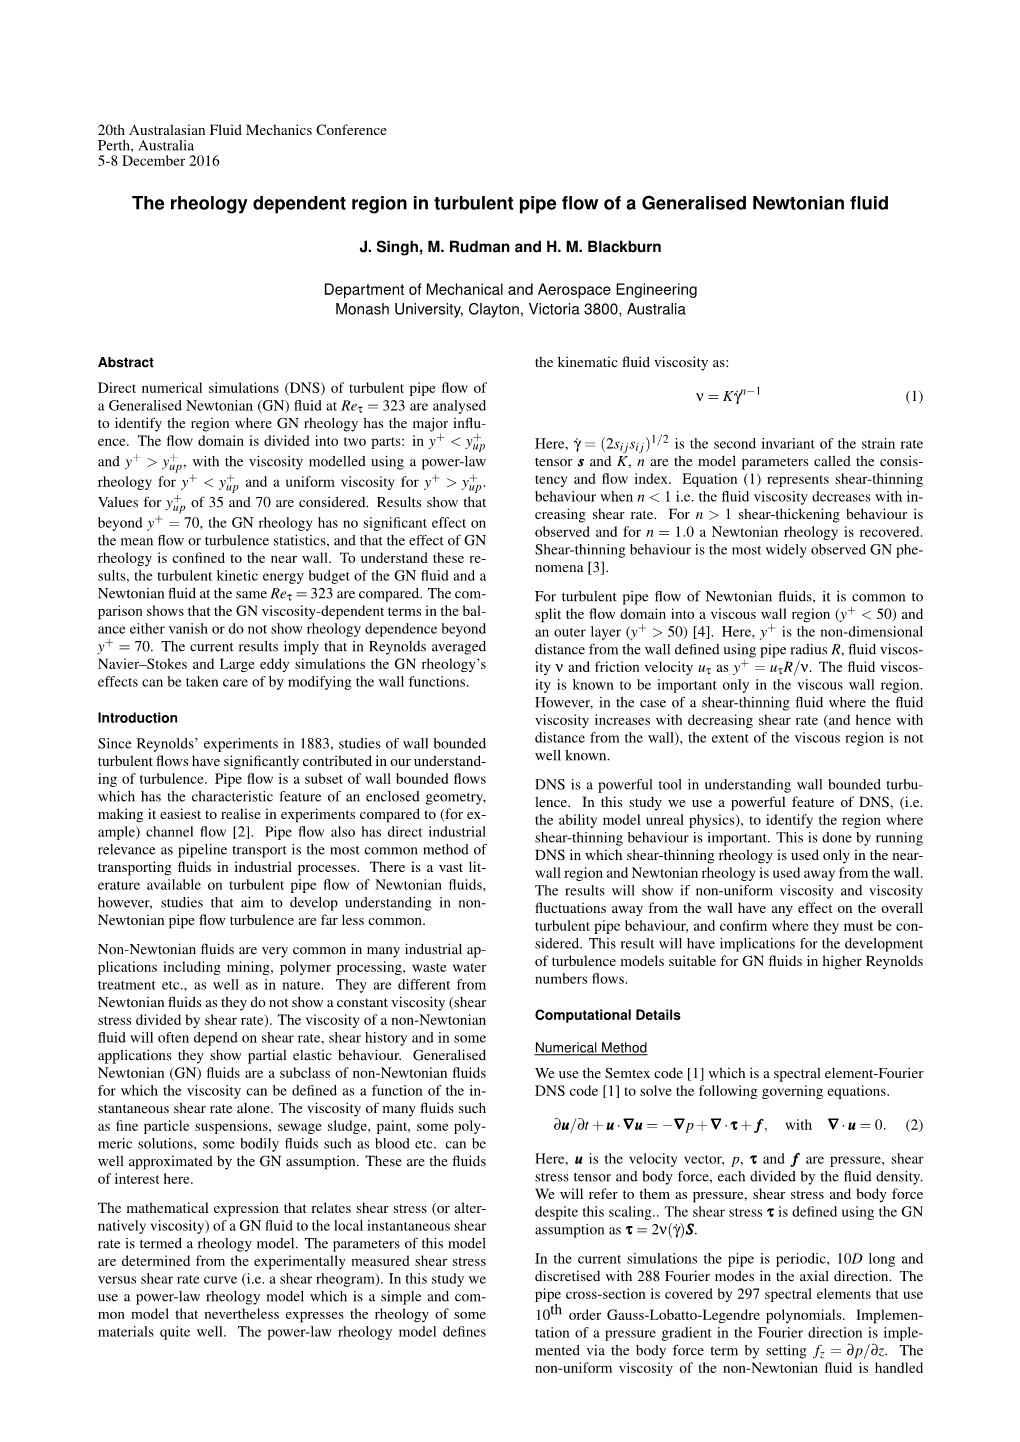 The Rheology Dependent Region in Turbulent Pipe Flow of a Generalised